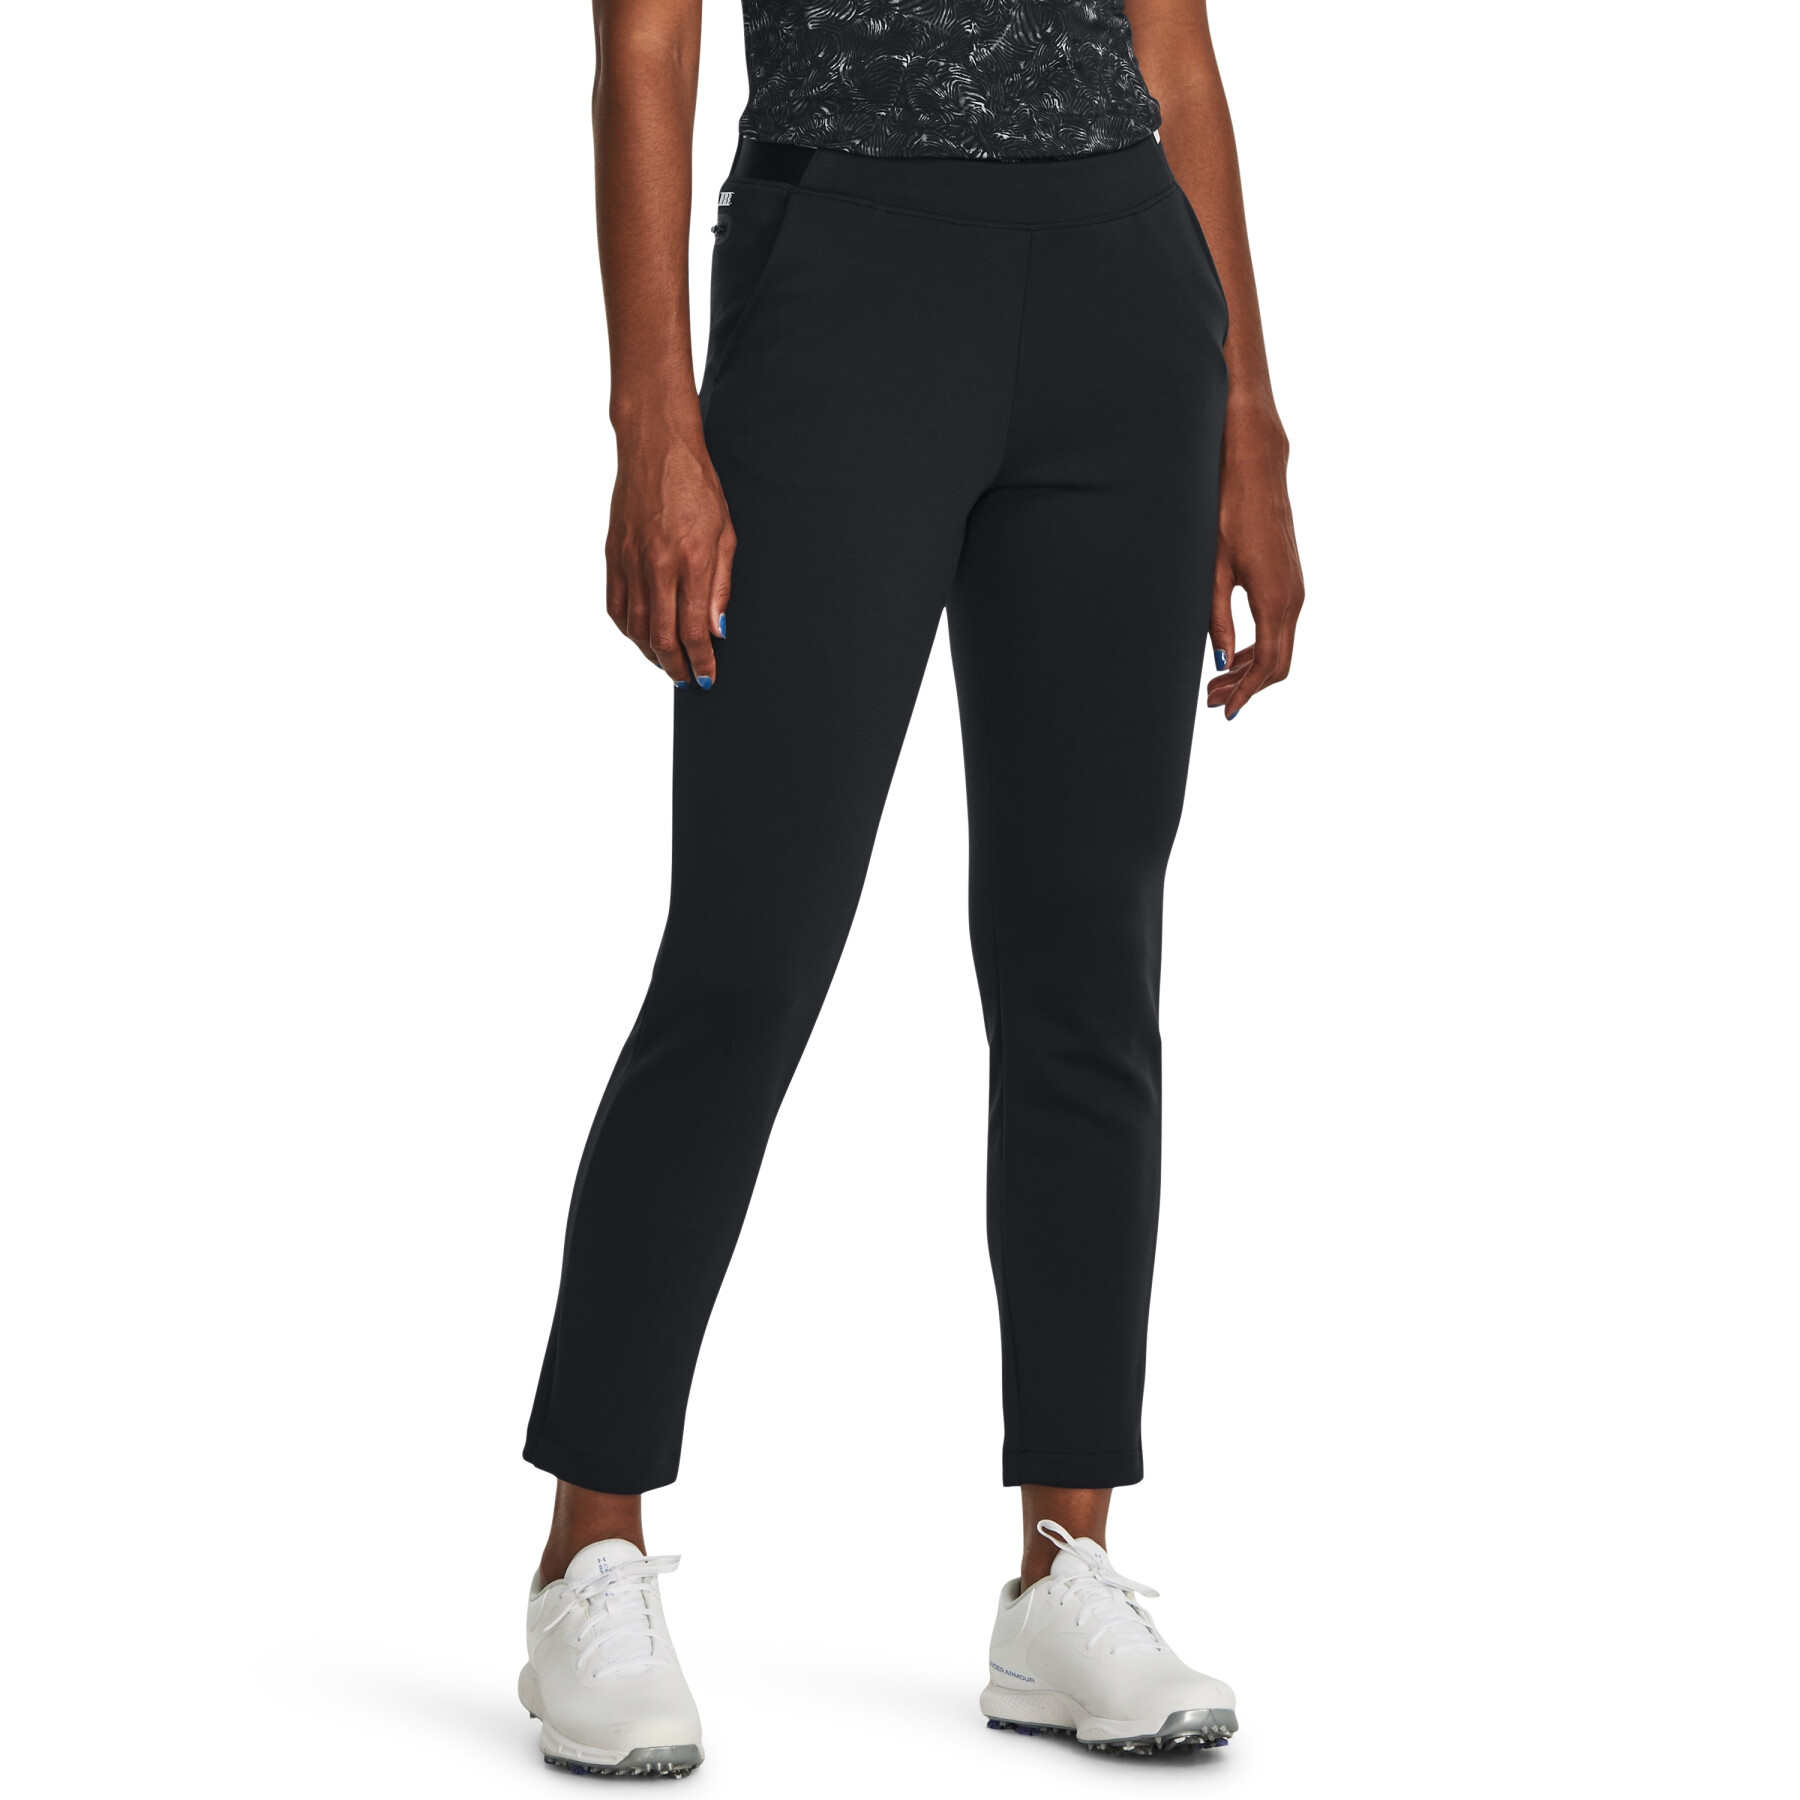 Women's pull-on jogging suit Under Armour Links